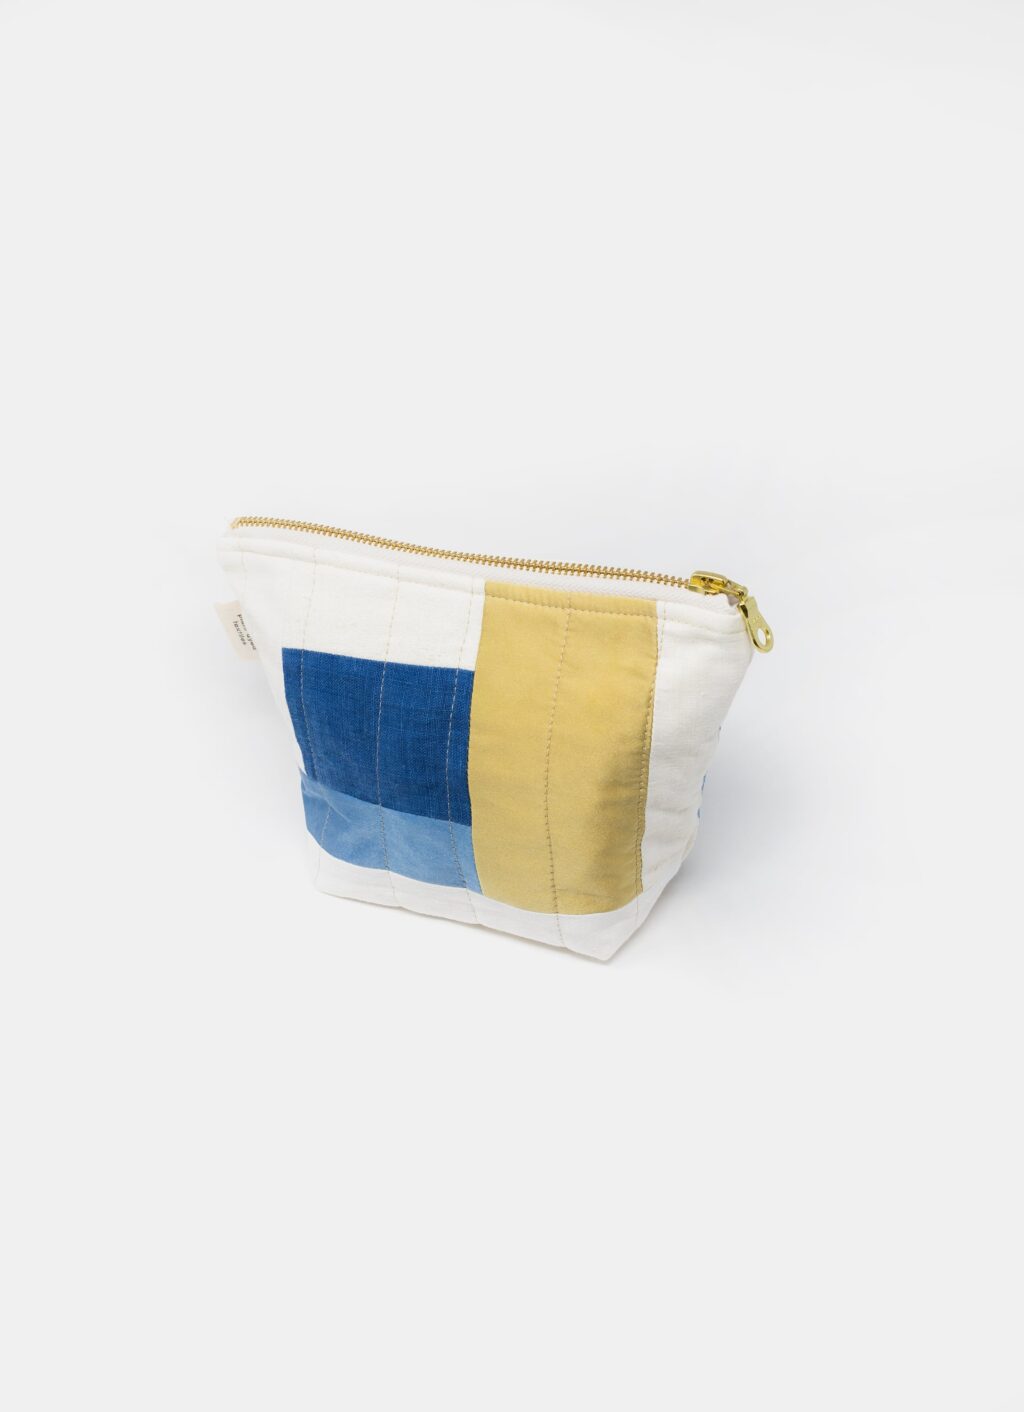 Marram - Patchwork Zipper Pouch - Plant dyed - Meadows collection - Indigo and blue tones